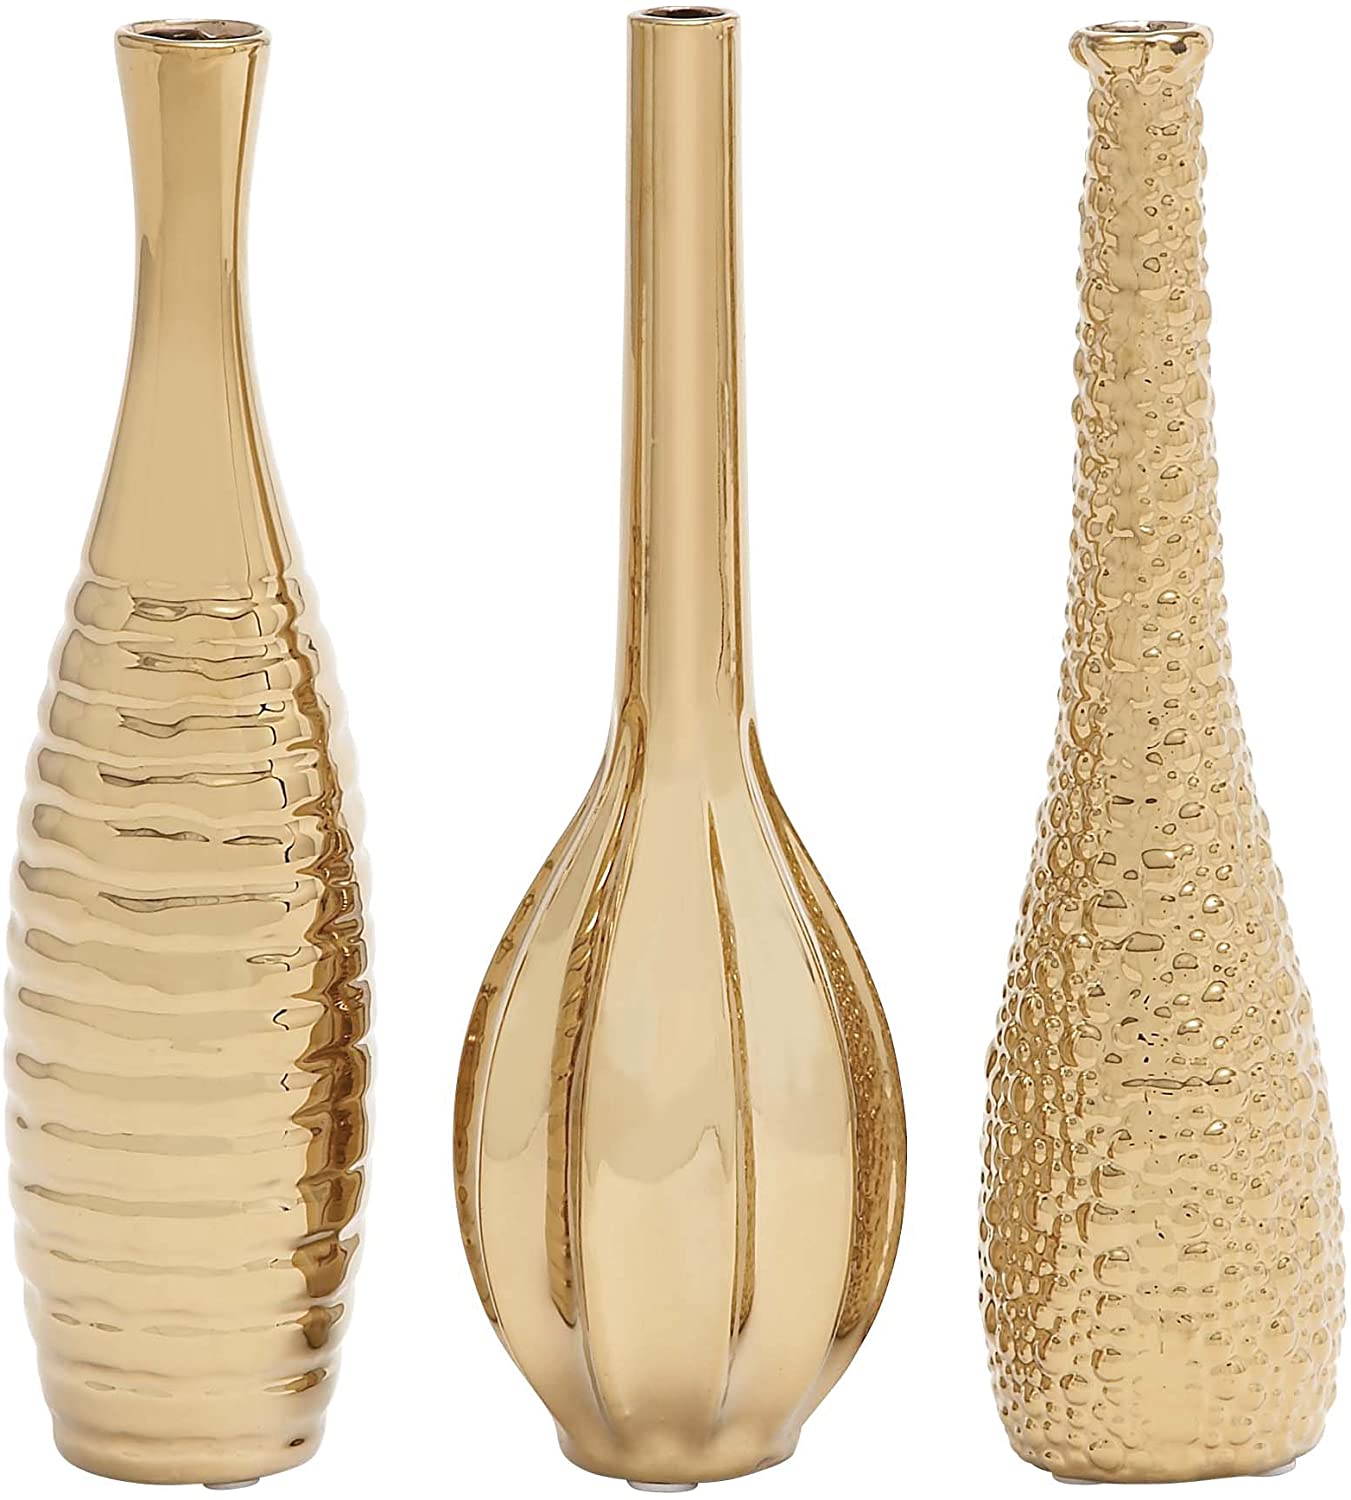 Set of 3 Gold Metallic Luxury Glam Teardrop Ceramic Vase, Set of 3, 12", 12", 12"H, Gold - Home Decor Gifts and More